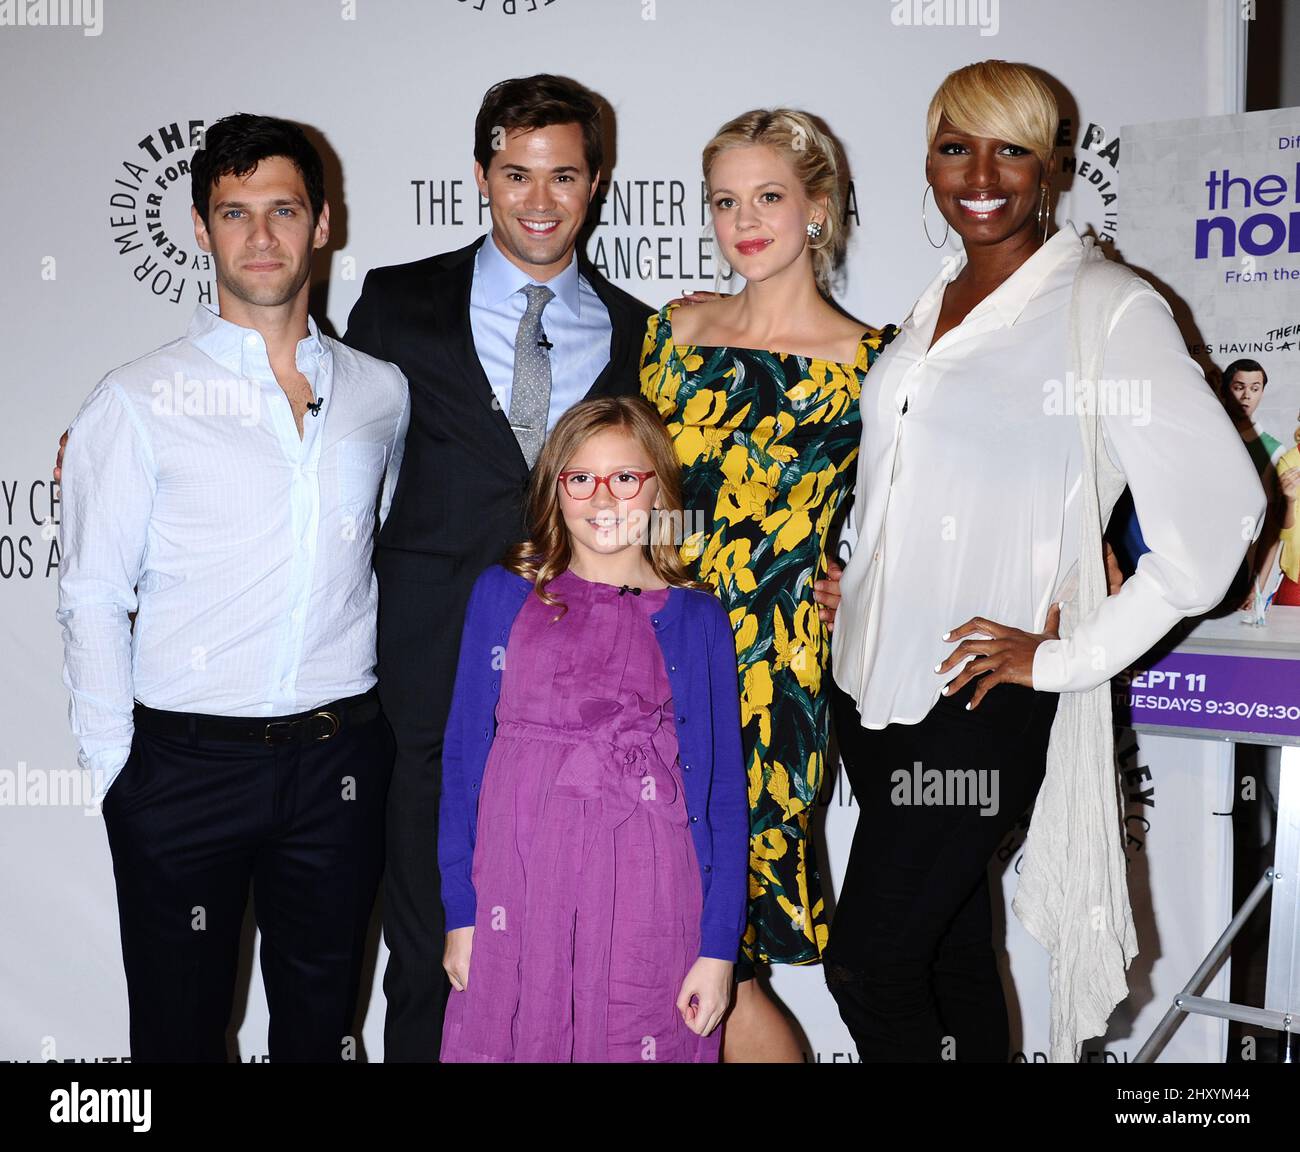 Justin Bartha, Andrew Rannells, Georgia King, Bebe Wood and NeNe Leakes attending the 2012 Fall TV Preview for NBC's 'The New Normal' attending the 2012 Fall TV Preview for NBC's 'The New Normal' at Paley Convention Centre, California.. Stock Photo